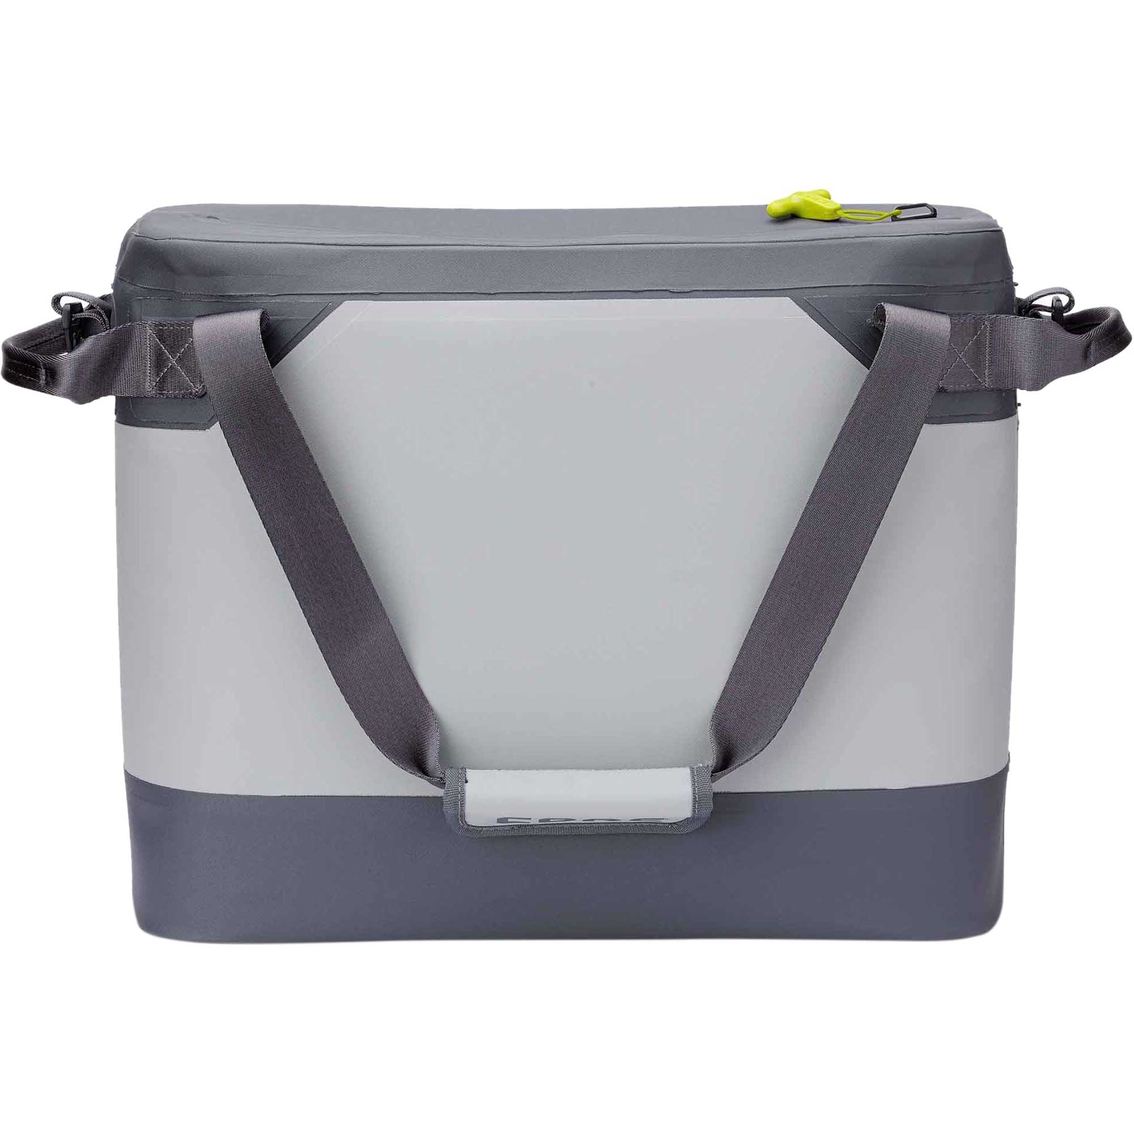 Core Equipment 20L Performance Soft Cooler Tote - Image 8 of 10